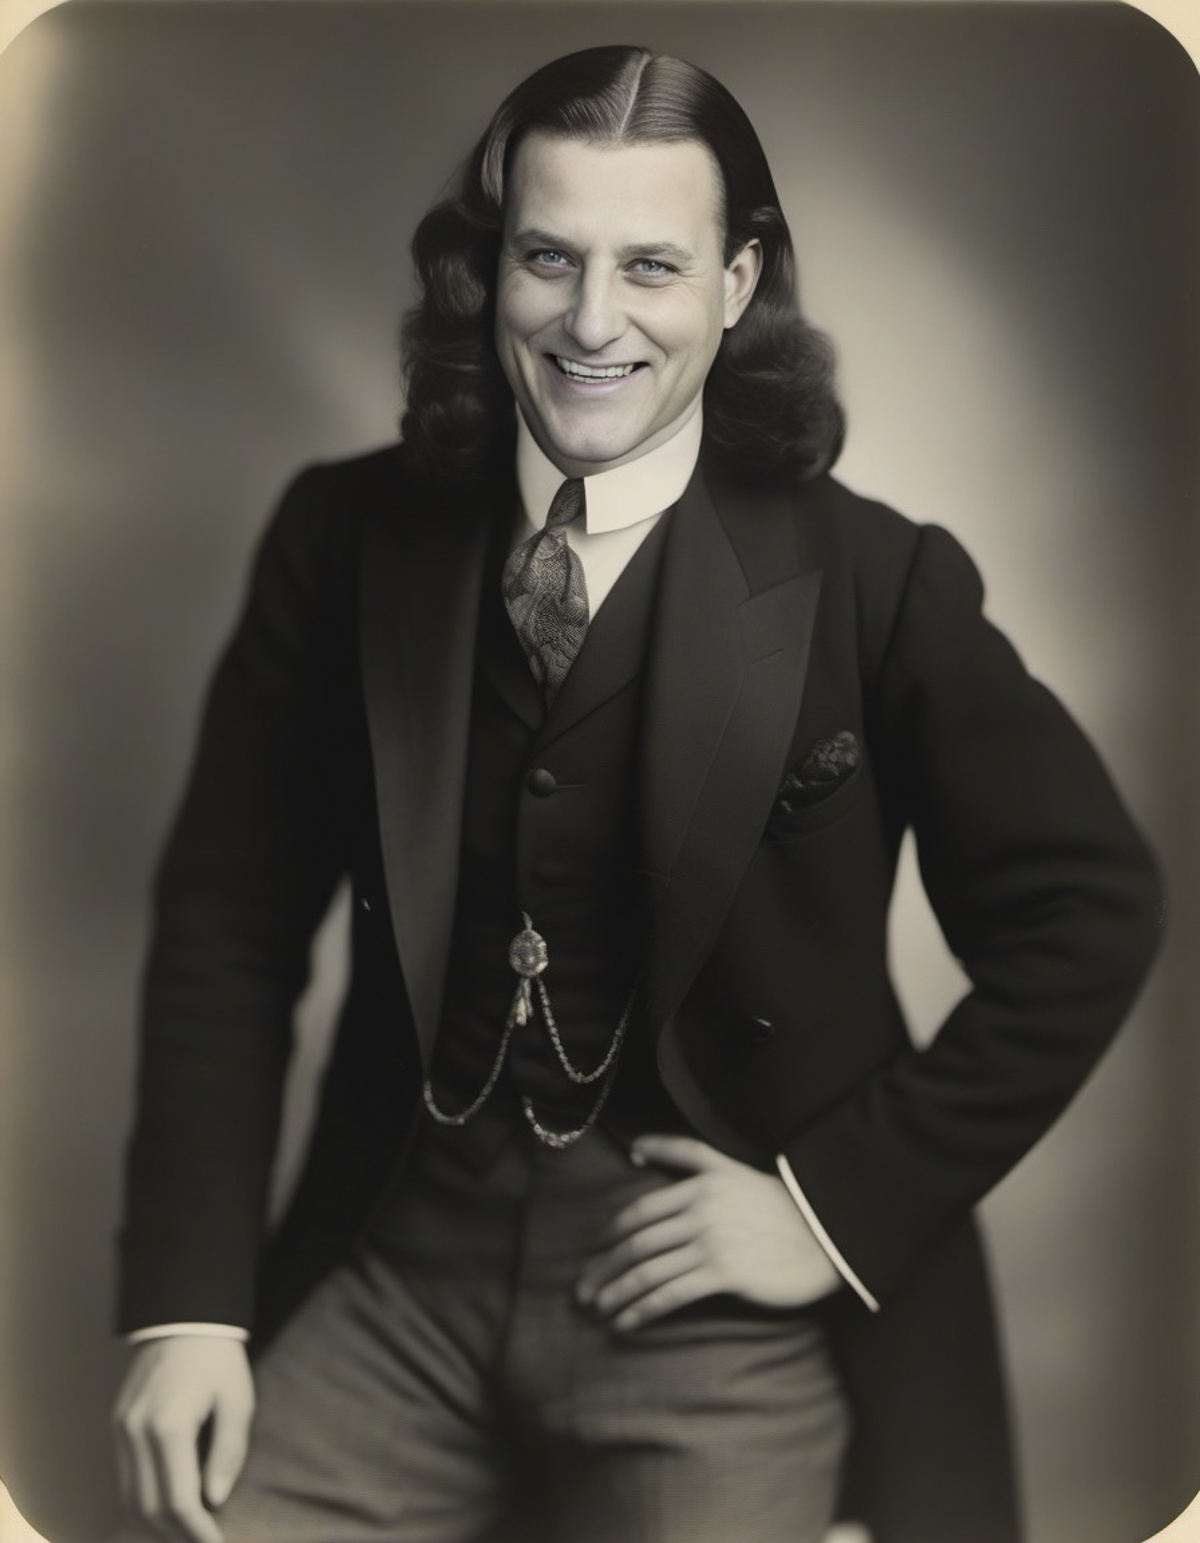 Jack Vosburgh, photograher, on stage at the Broadway in New York 